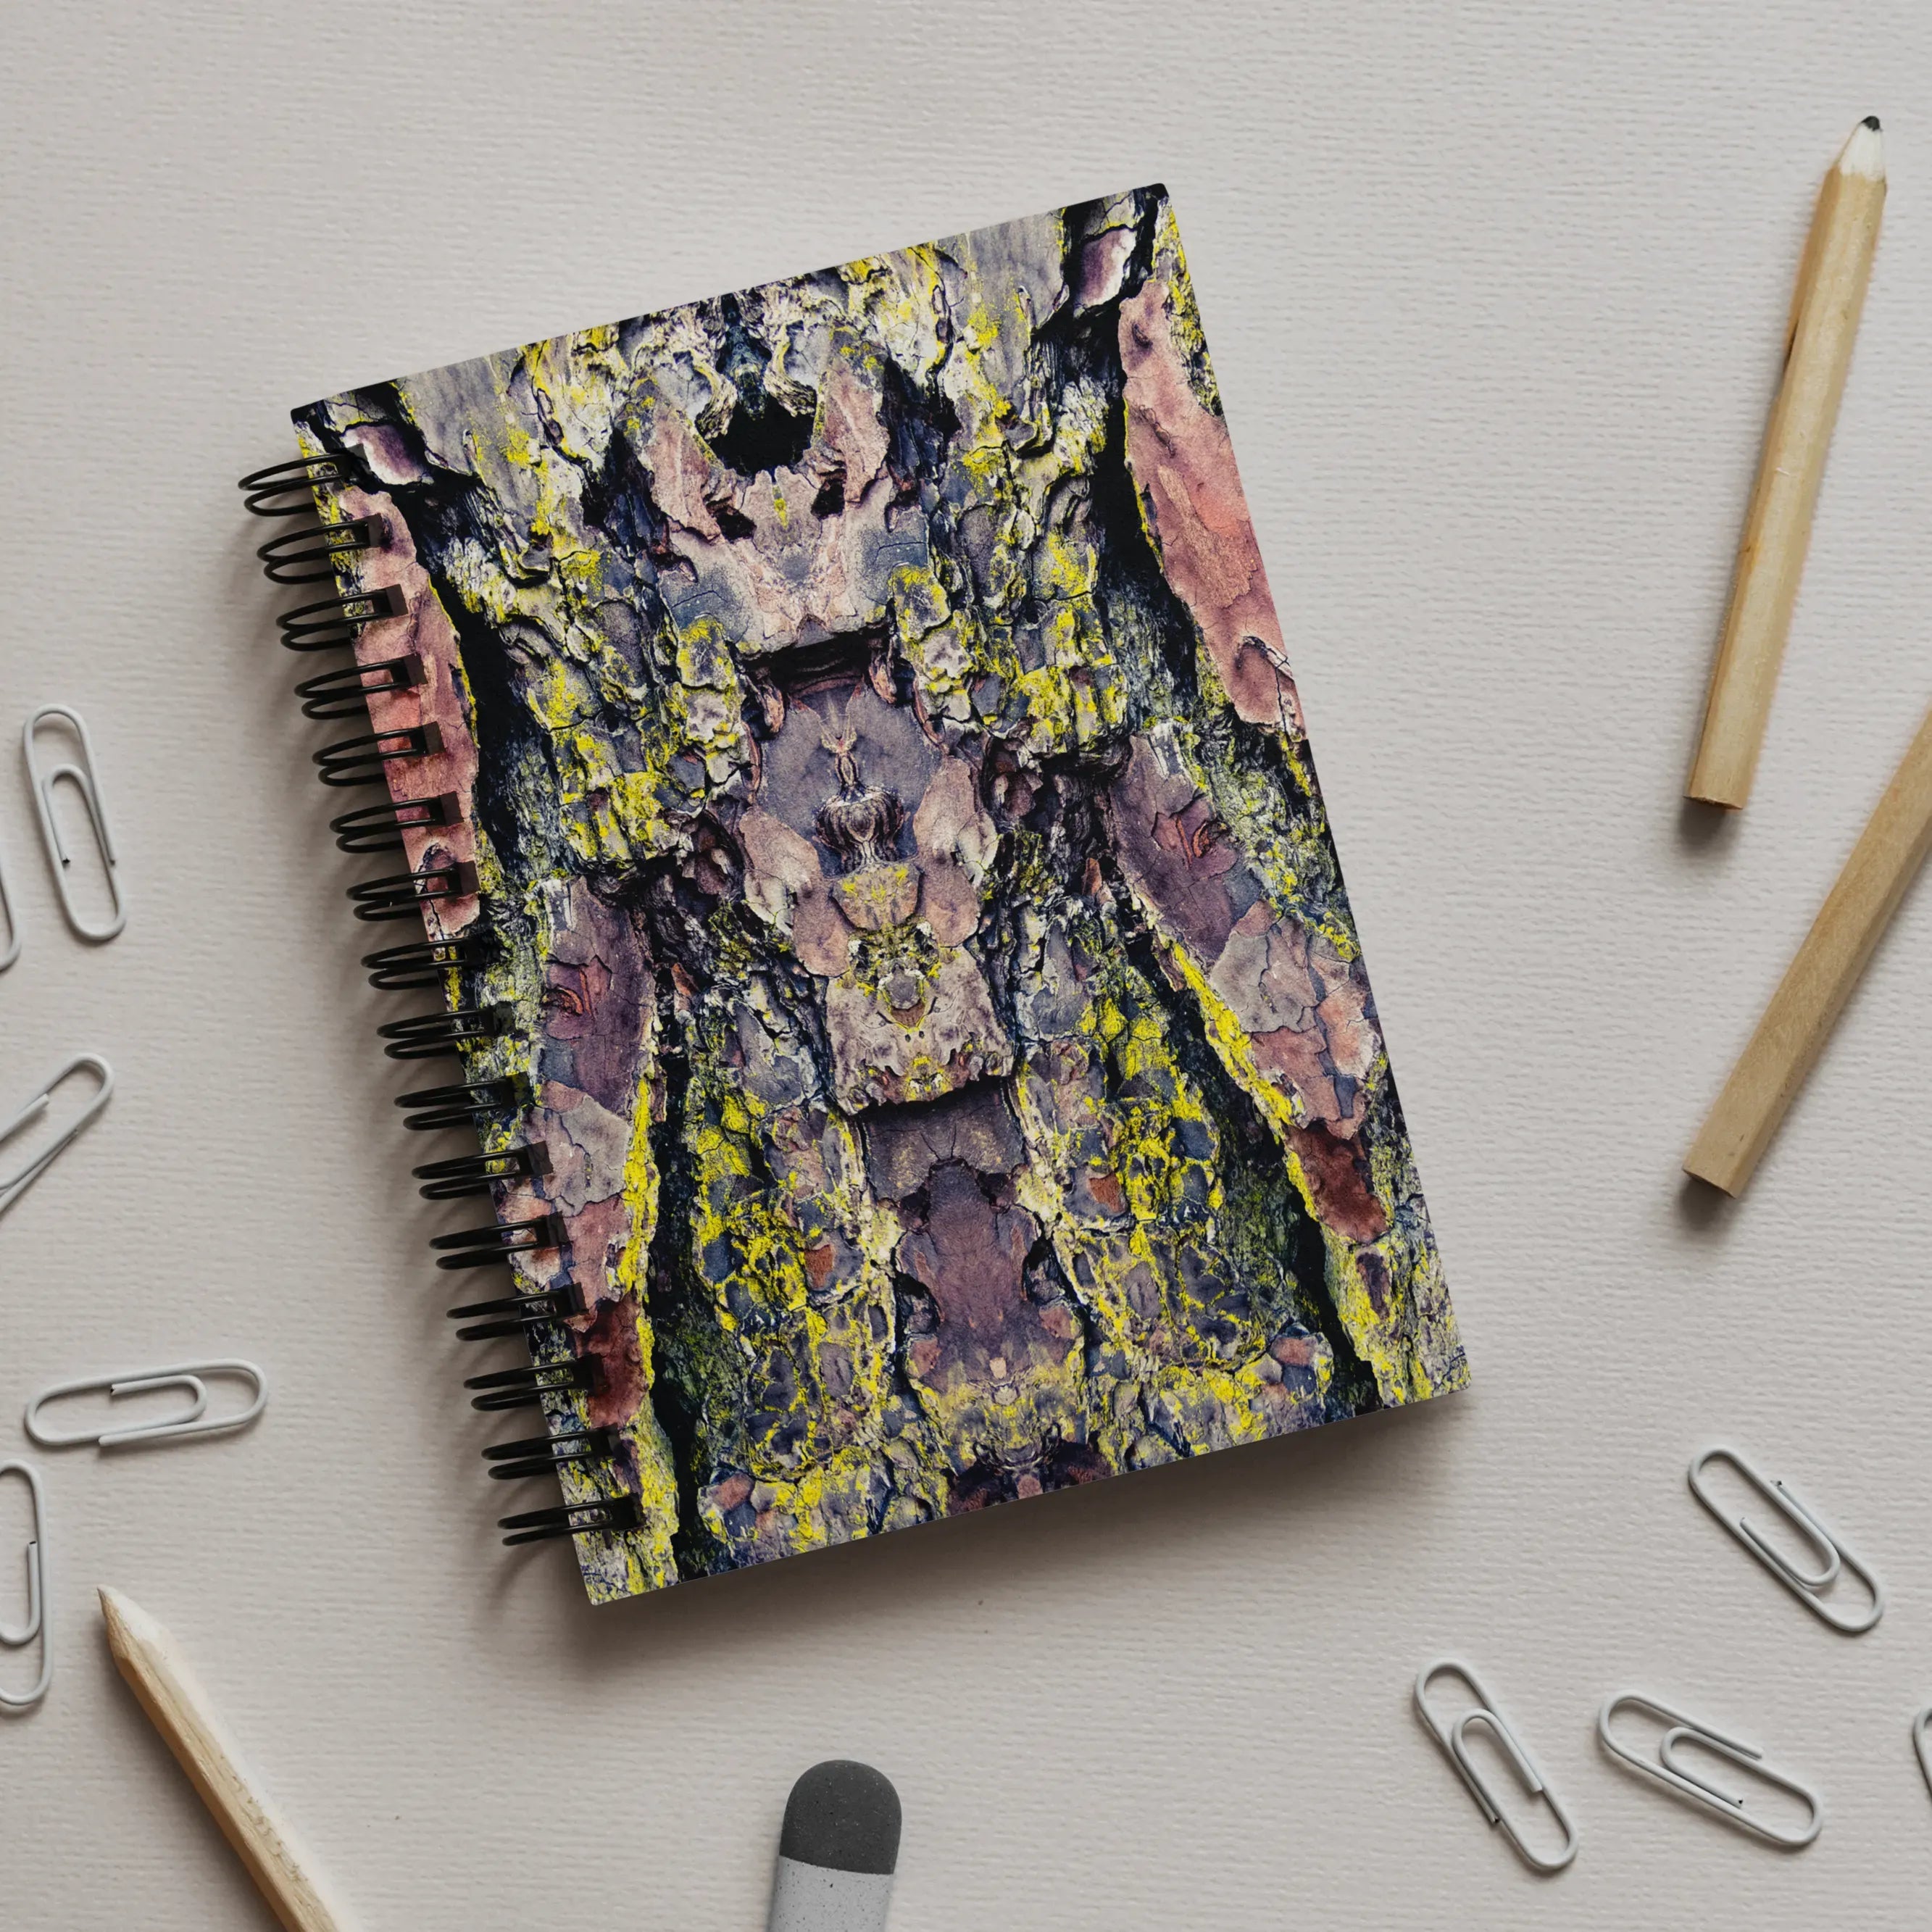 Barking Mad Too Notebook - Notebooks & Notepads - Aesthetic Art